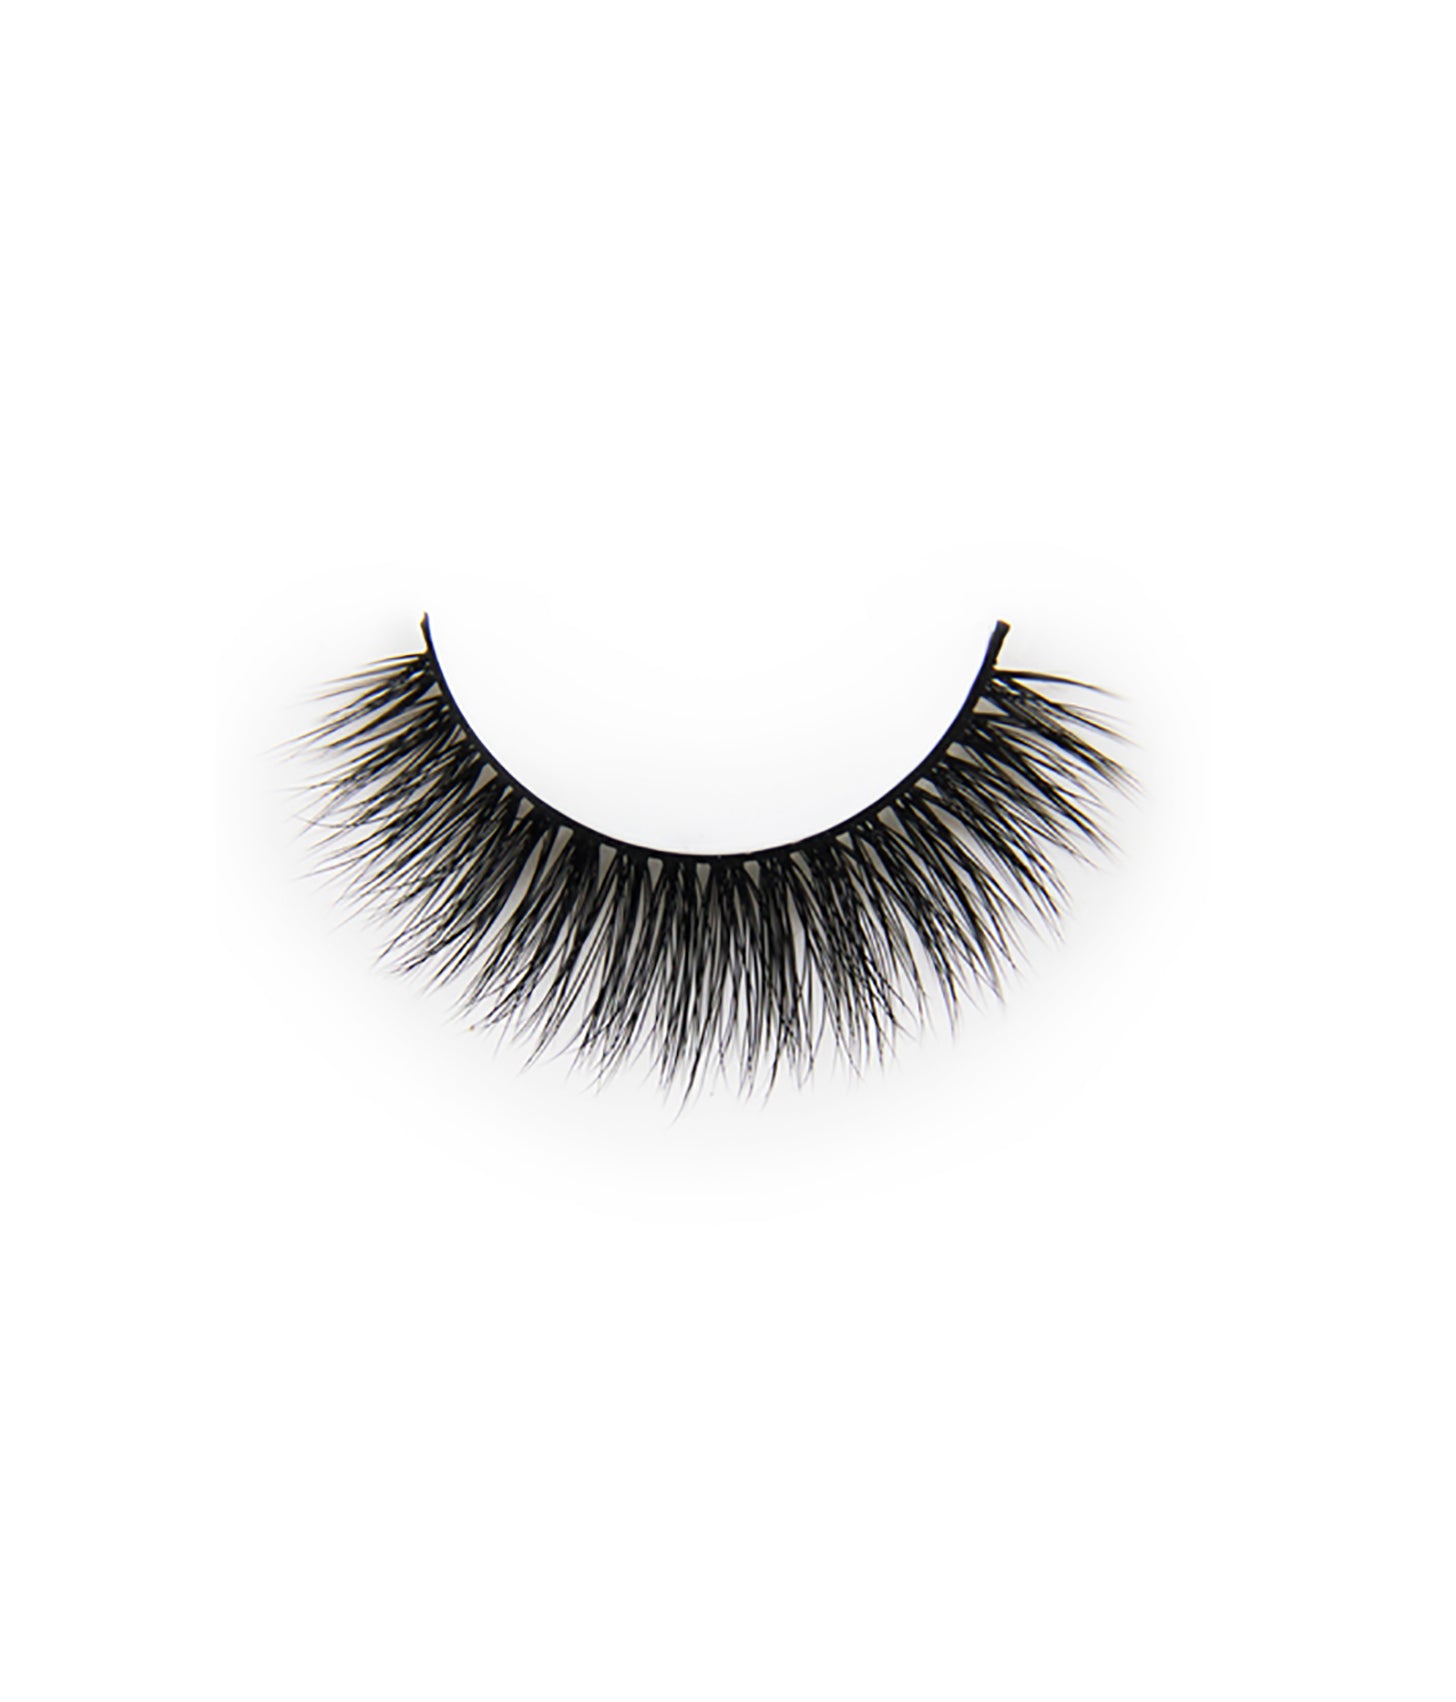 'Spice Up Your Lash' Silk Lashes